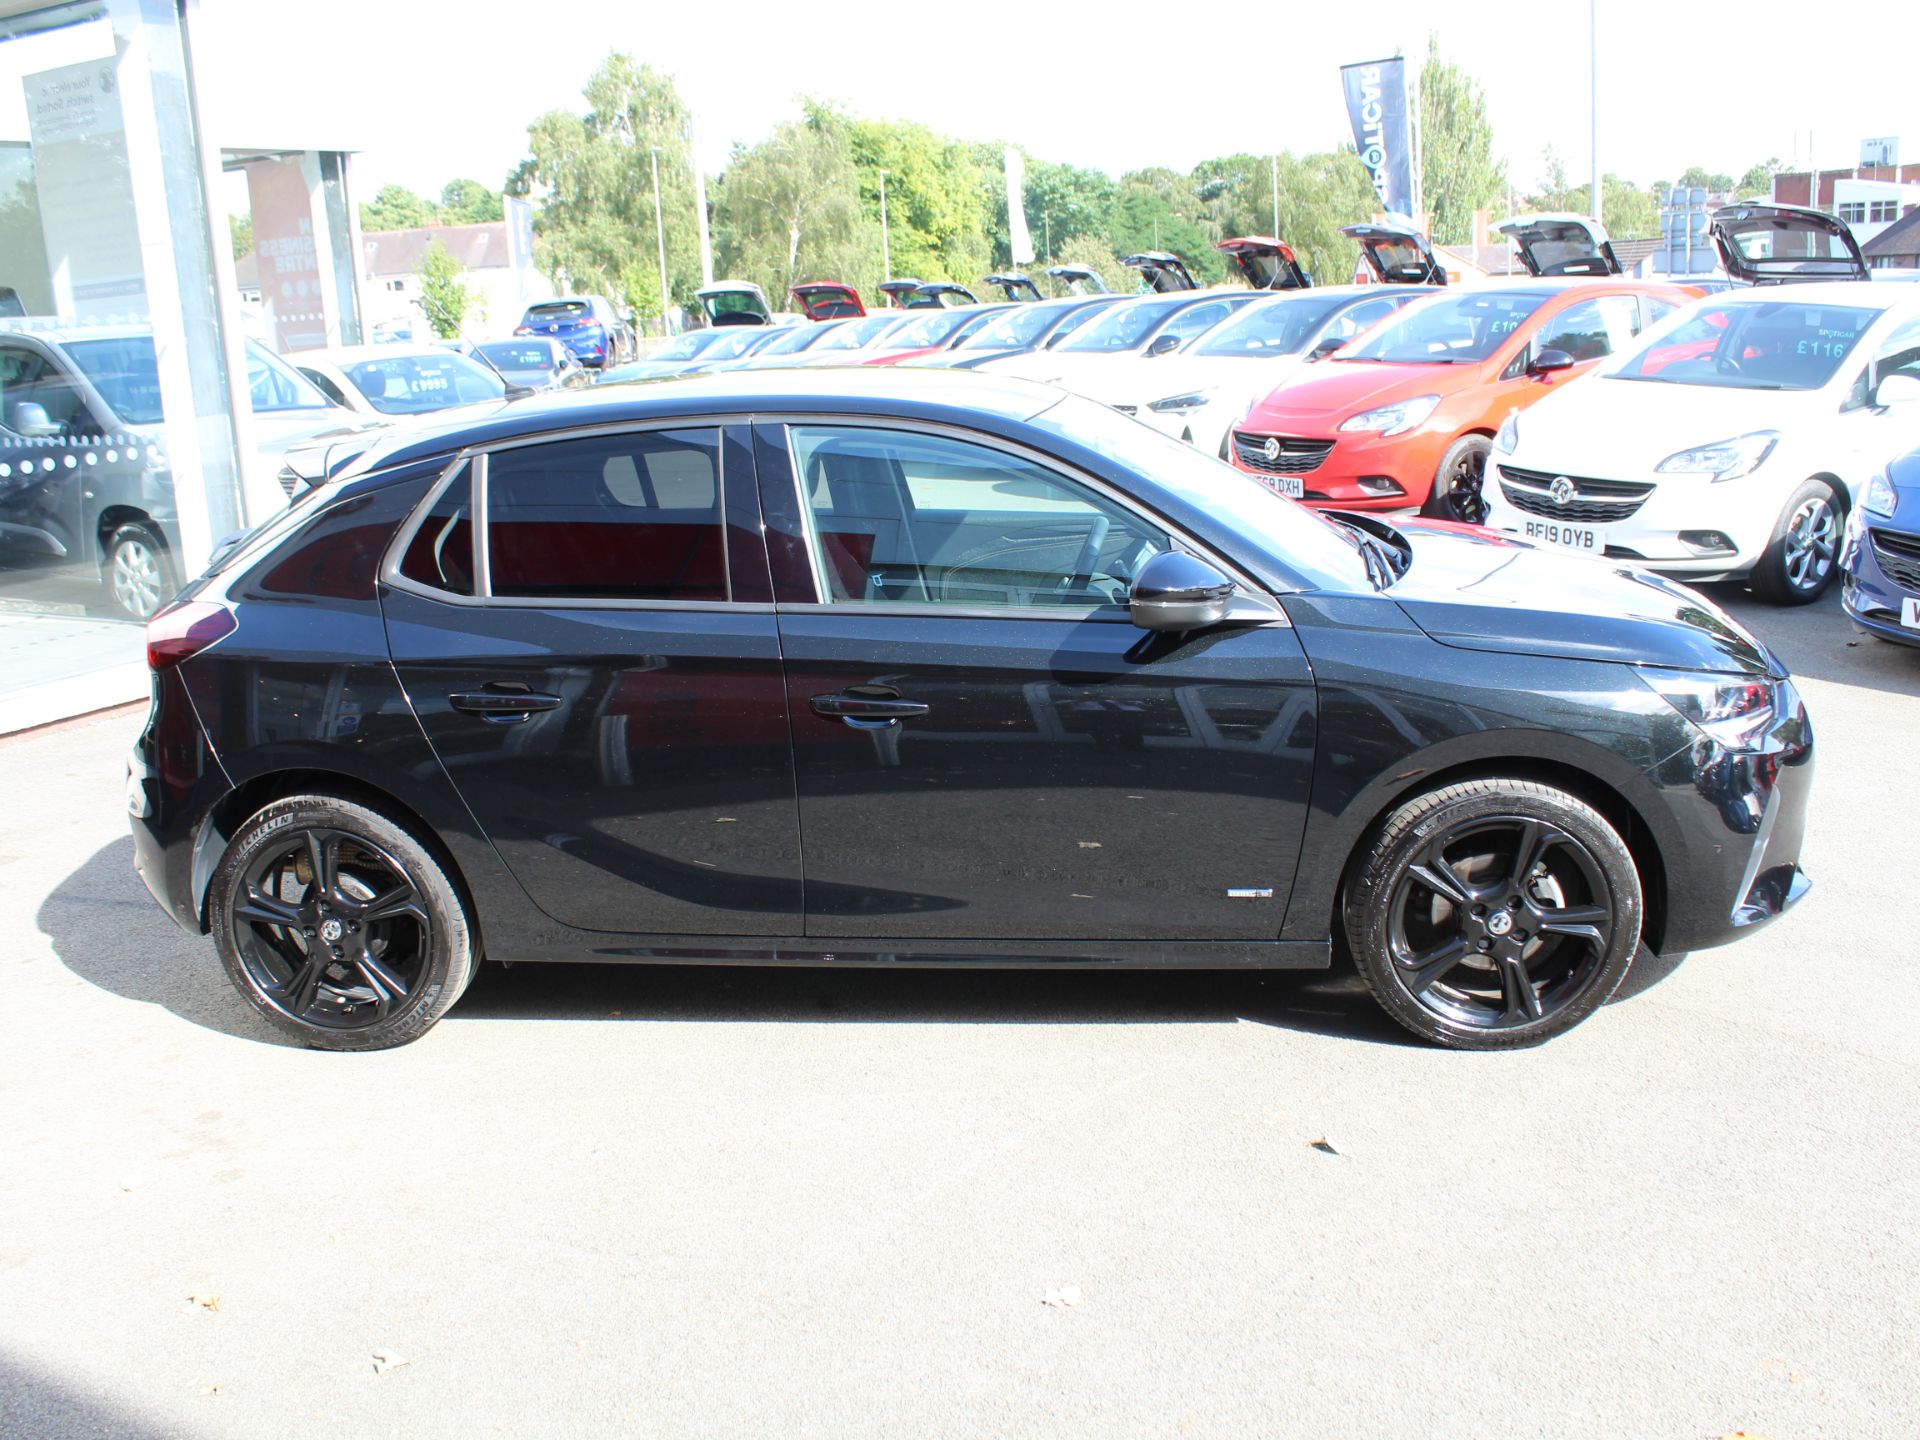 Vauxhall Corsa 1.2 (75ps) Griffin 5dr, Registration: VK71JGY, Date First Registered: 30/09/2021, - Image 2 of 7